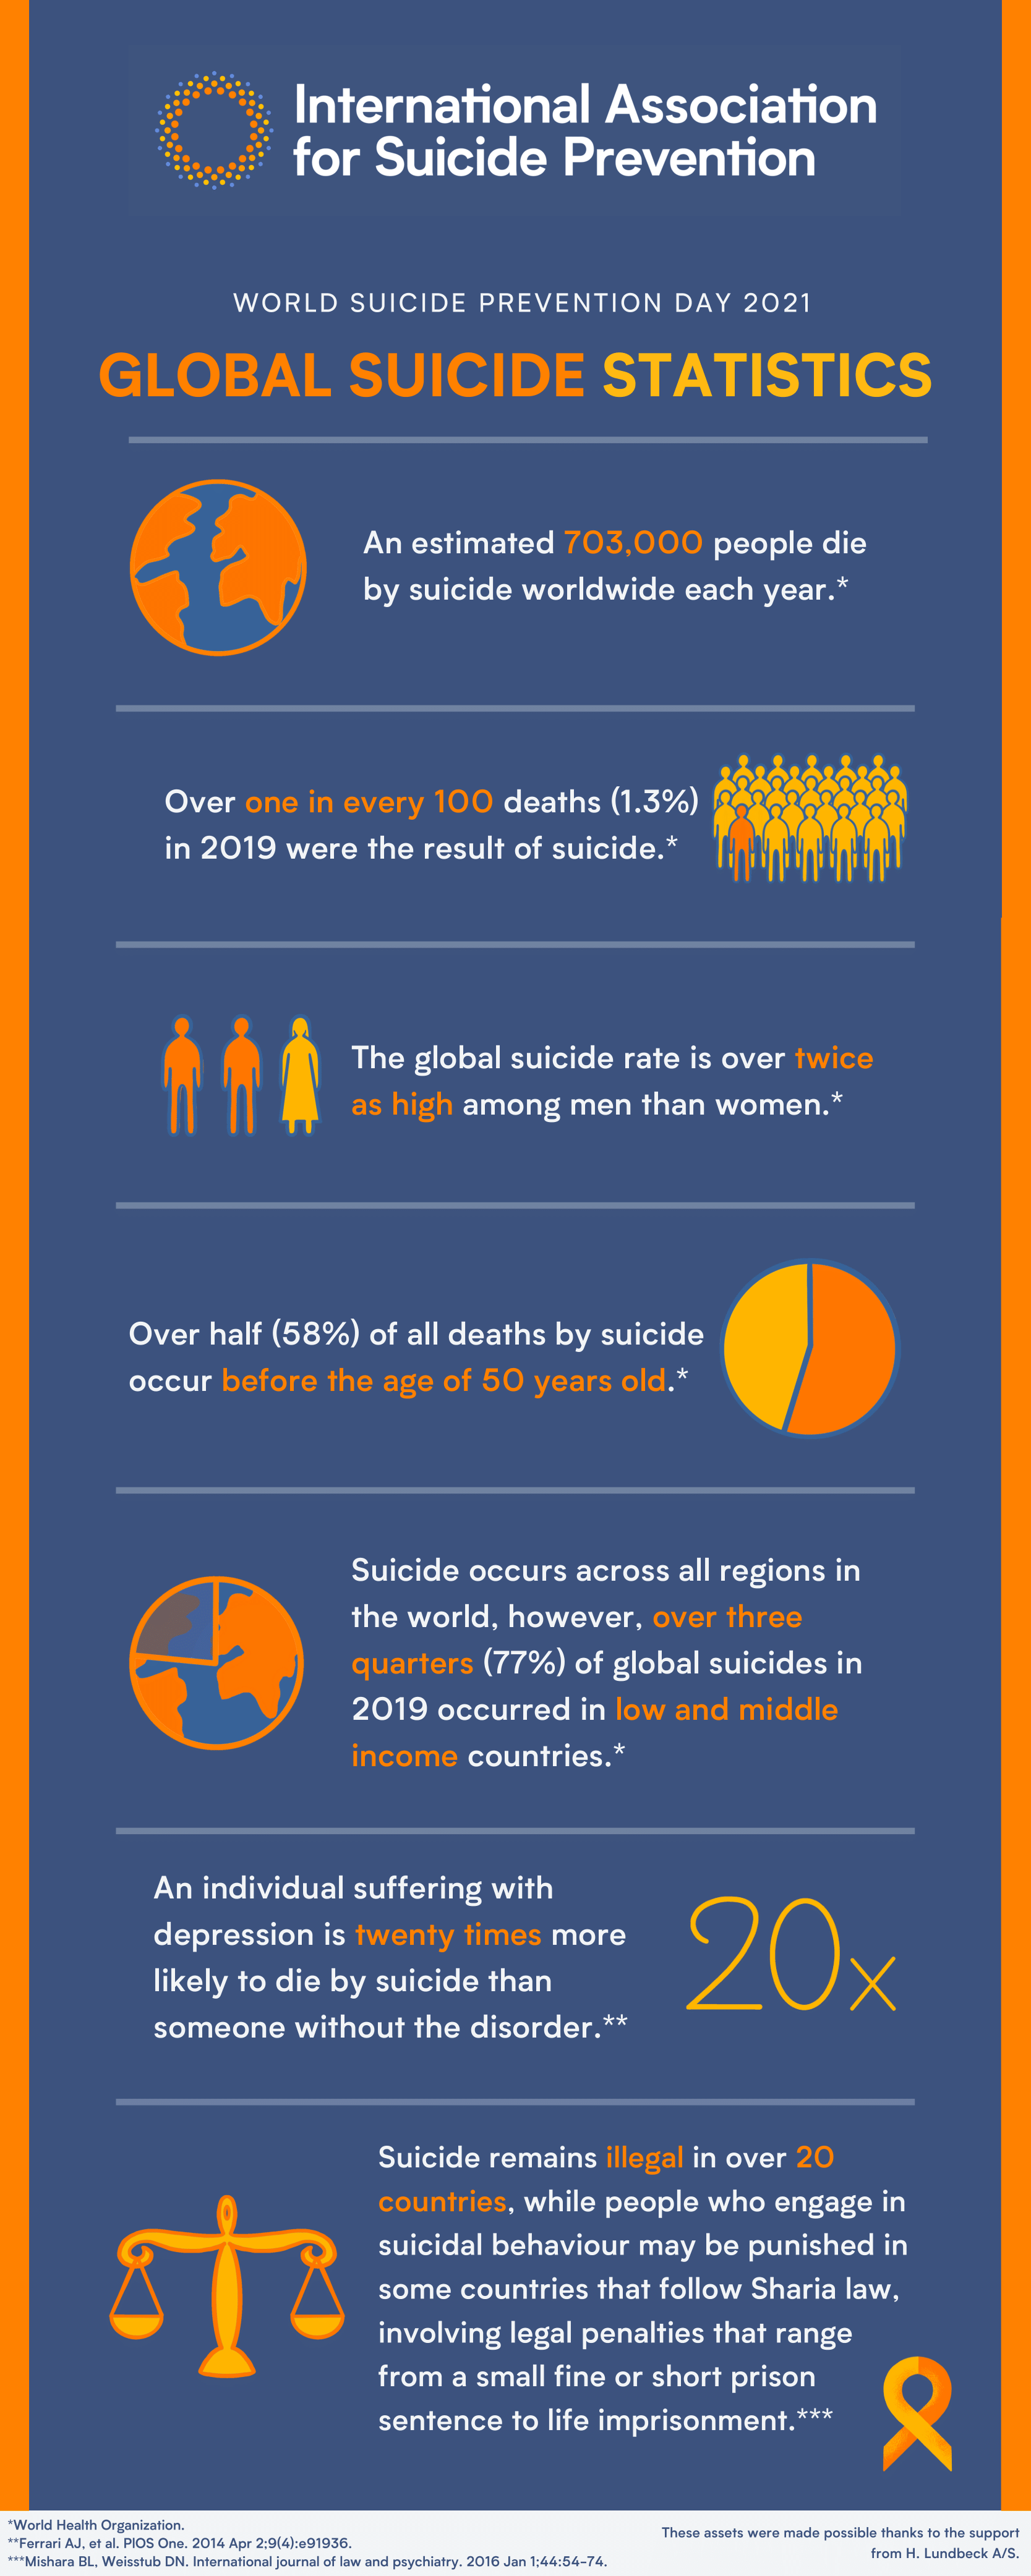 Suicide facts and figures by the International Association of Suicide Prevention, 2021